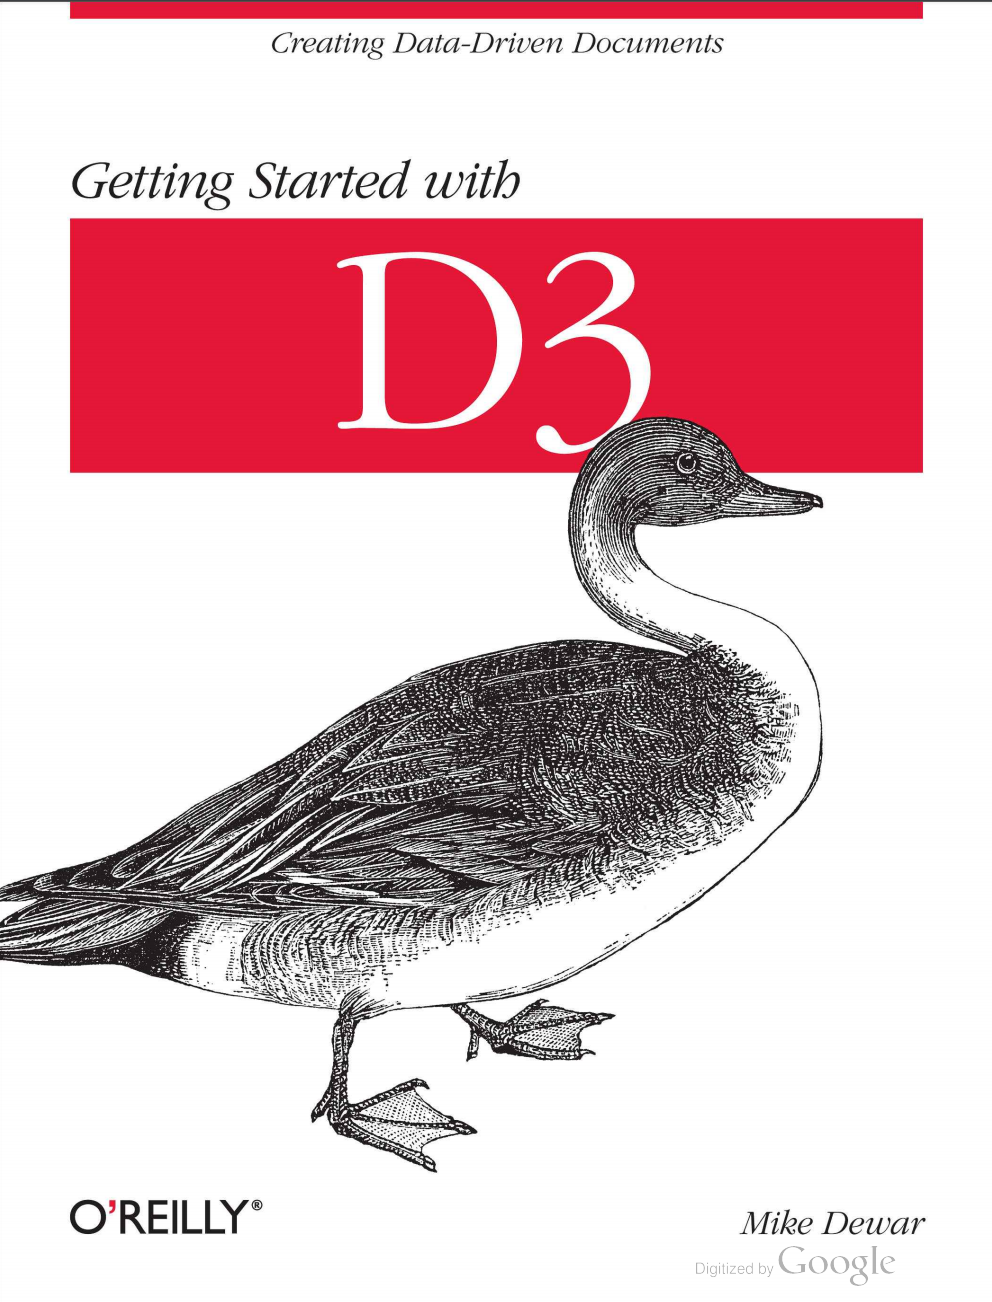 Bad read: Getting started with d3